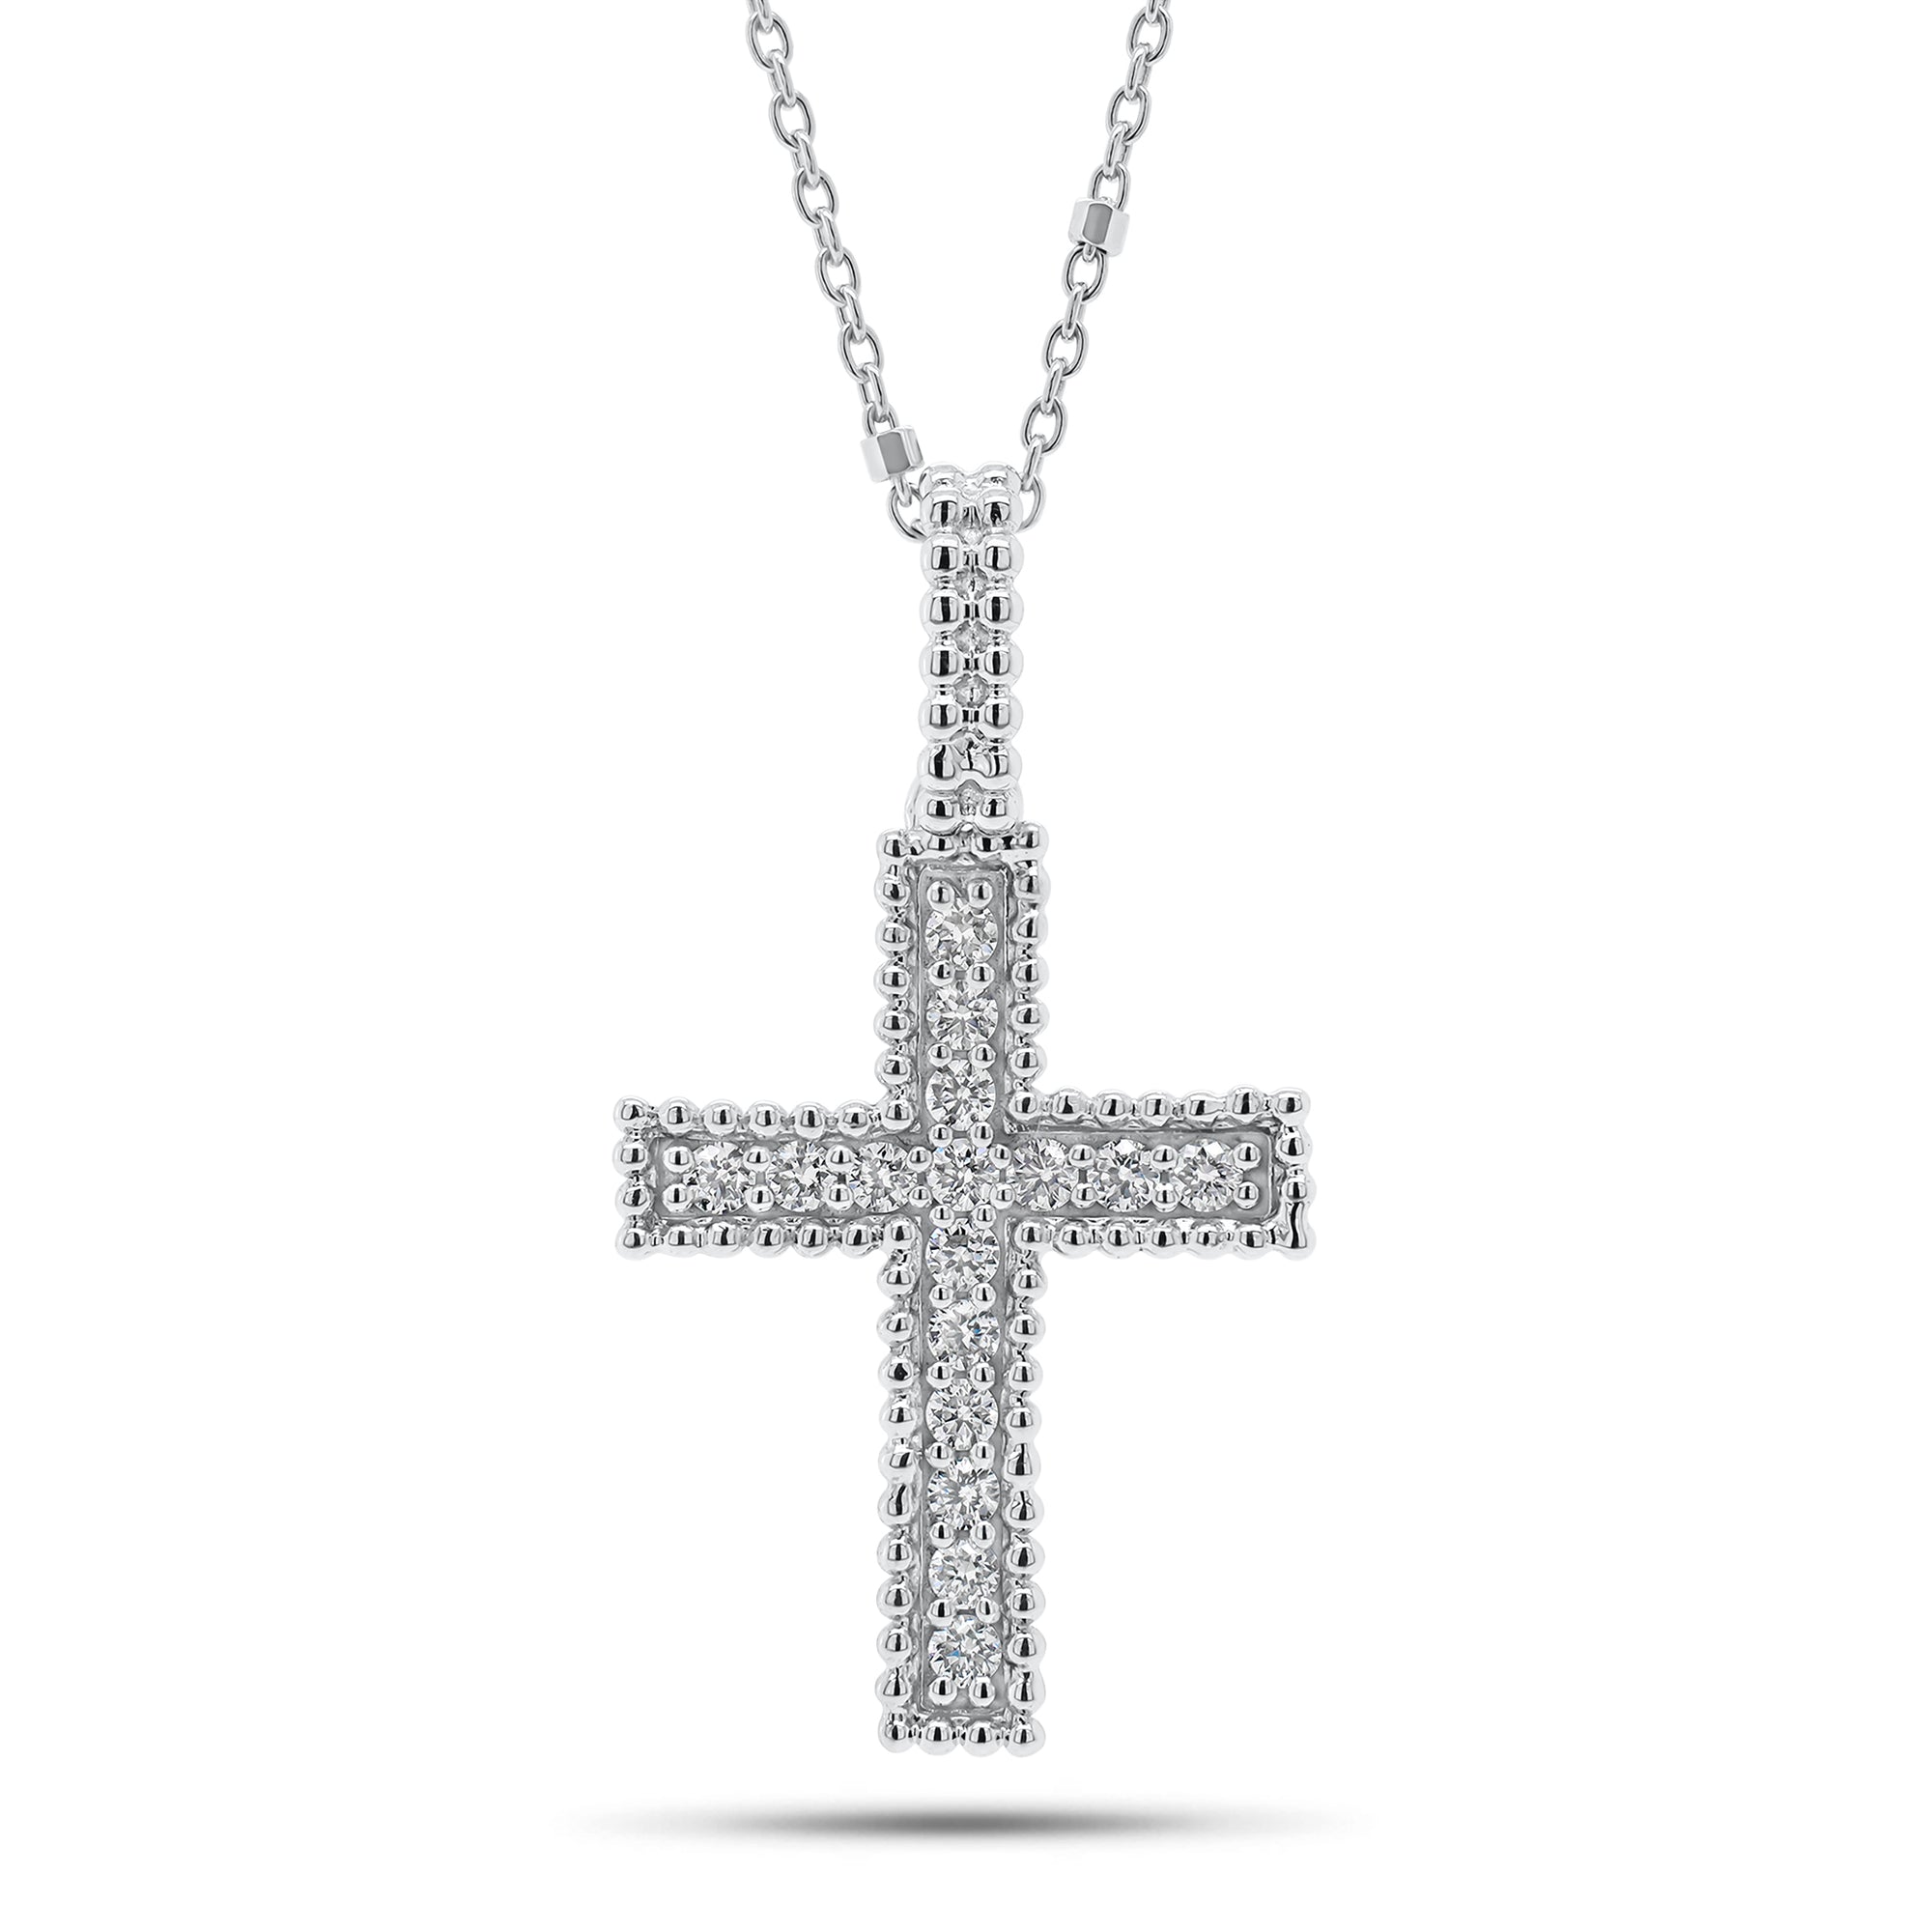 Diamond and Beaded Gold Cross Pendant - - 14K gold weighing 3.5 grams  - 16 round diamonds weighing 0.24 carats